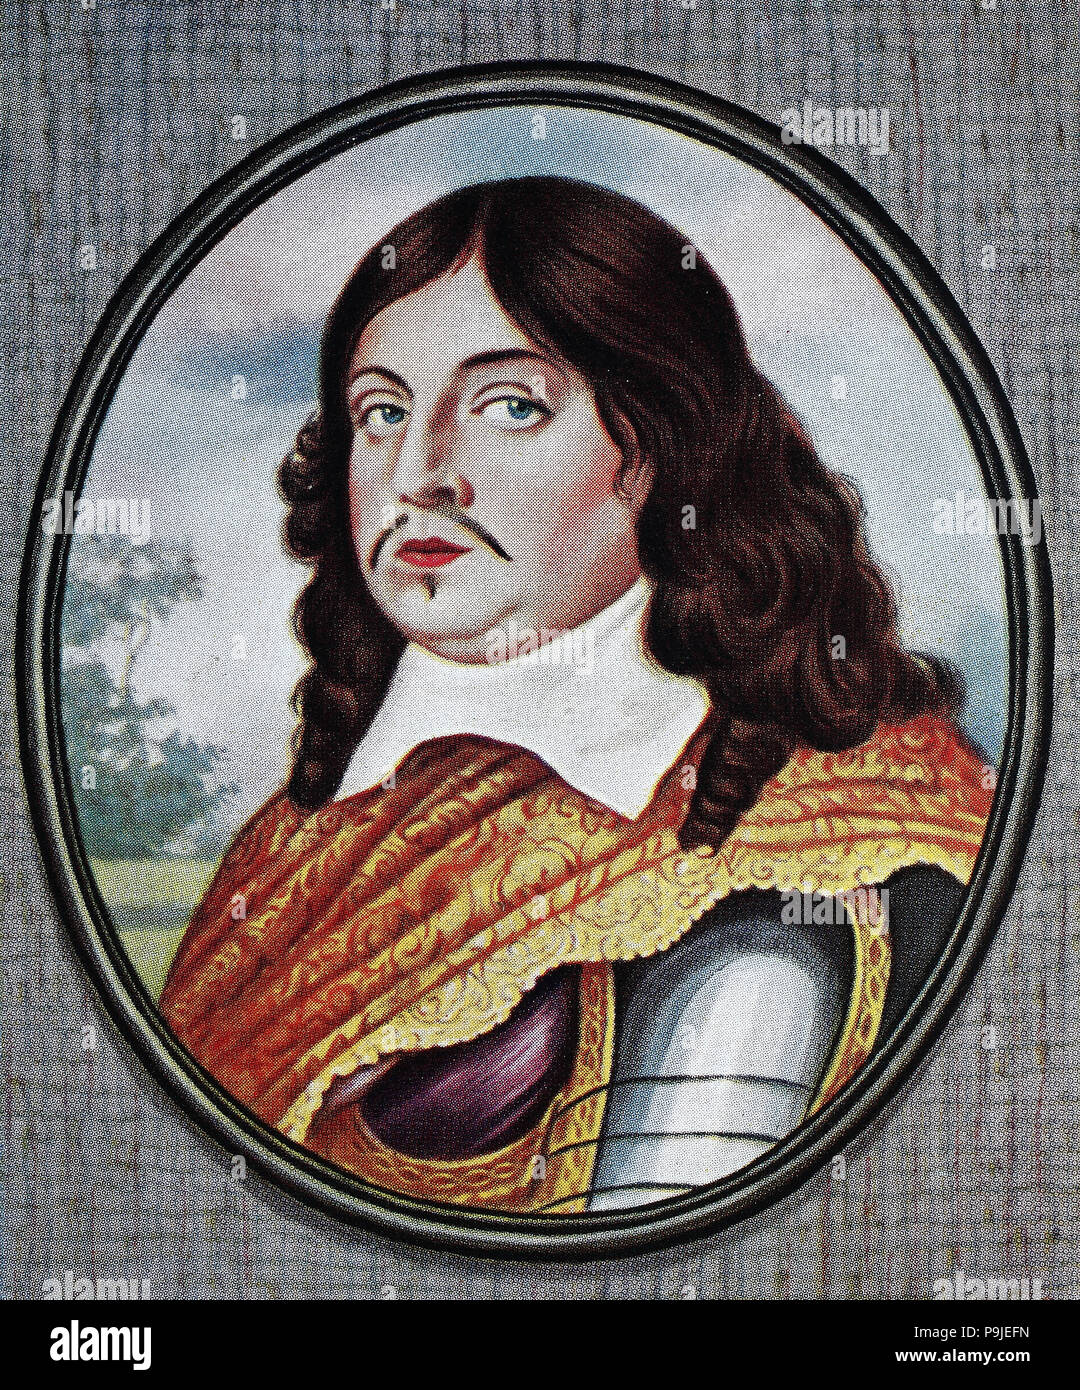 Charles X Gustav, also Carl Gustav, Karl X Gustav, 8 November 1622 â€“ 13 February 1660, was King of Sweden from 1654 until his death. He was the son of John Casimir, Count Palatine of ZweibrÃ¼cken-Kleeburg and Catherine of Sweden, digital improved reproduction of an original print from the year 1900 Stock Photo